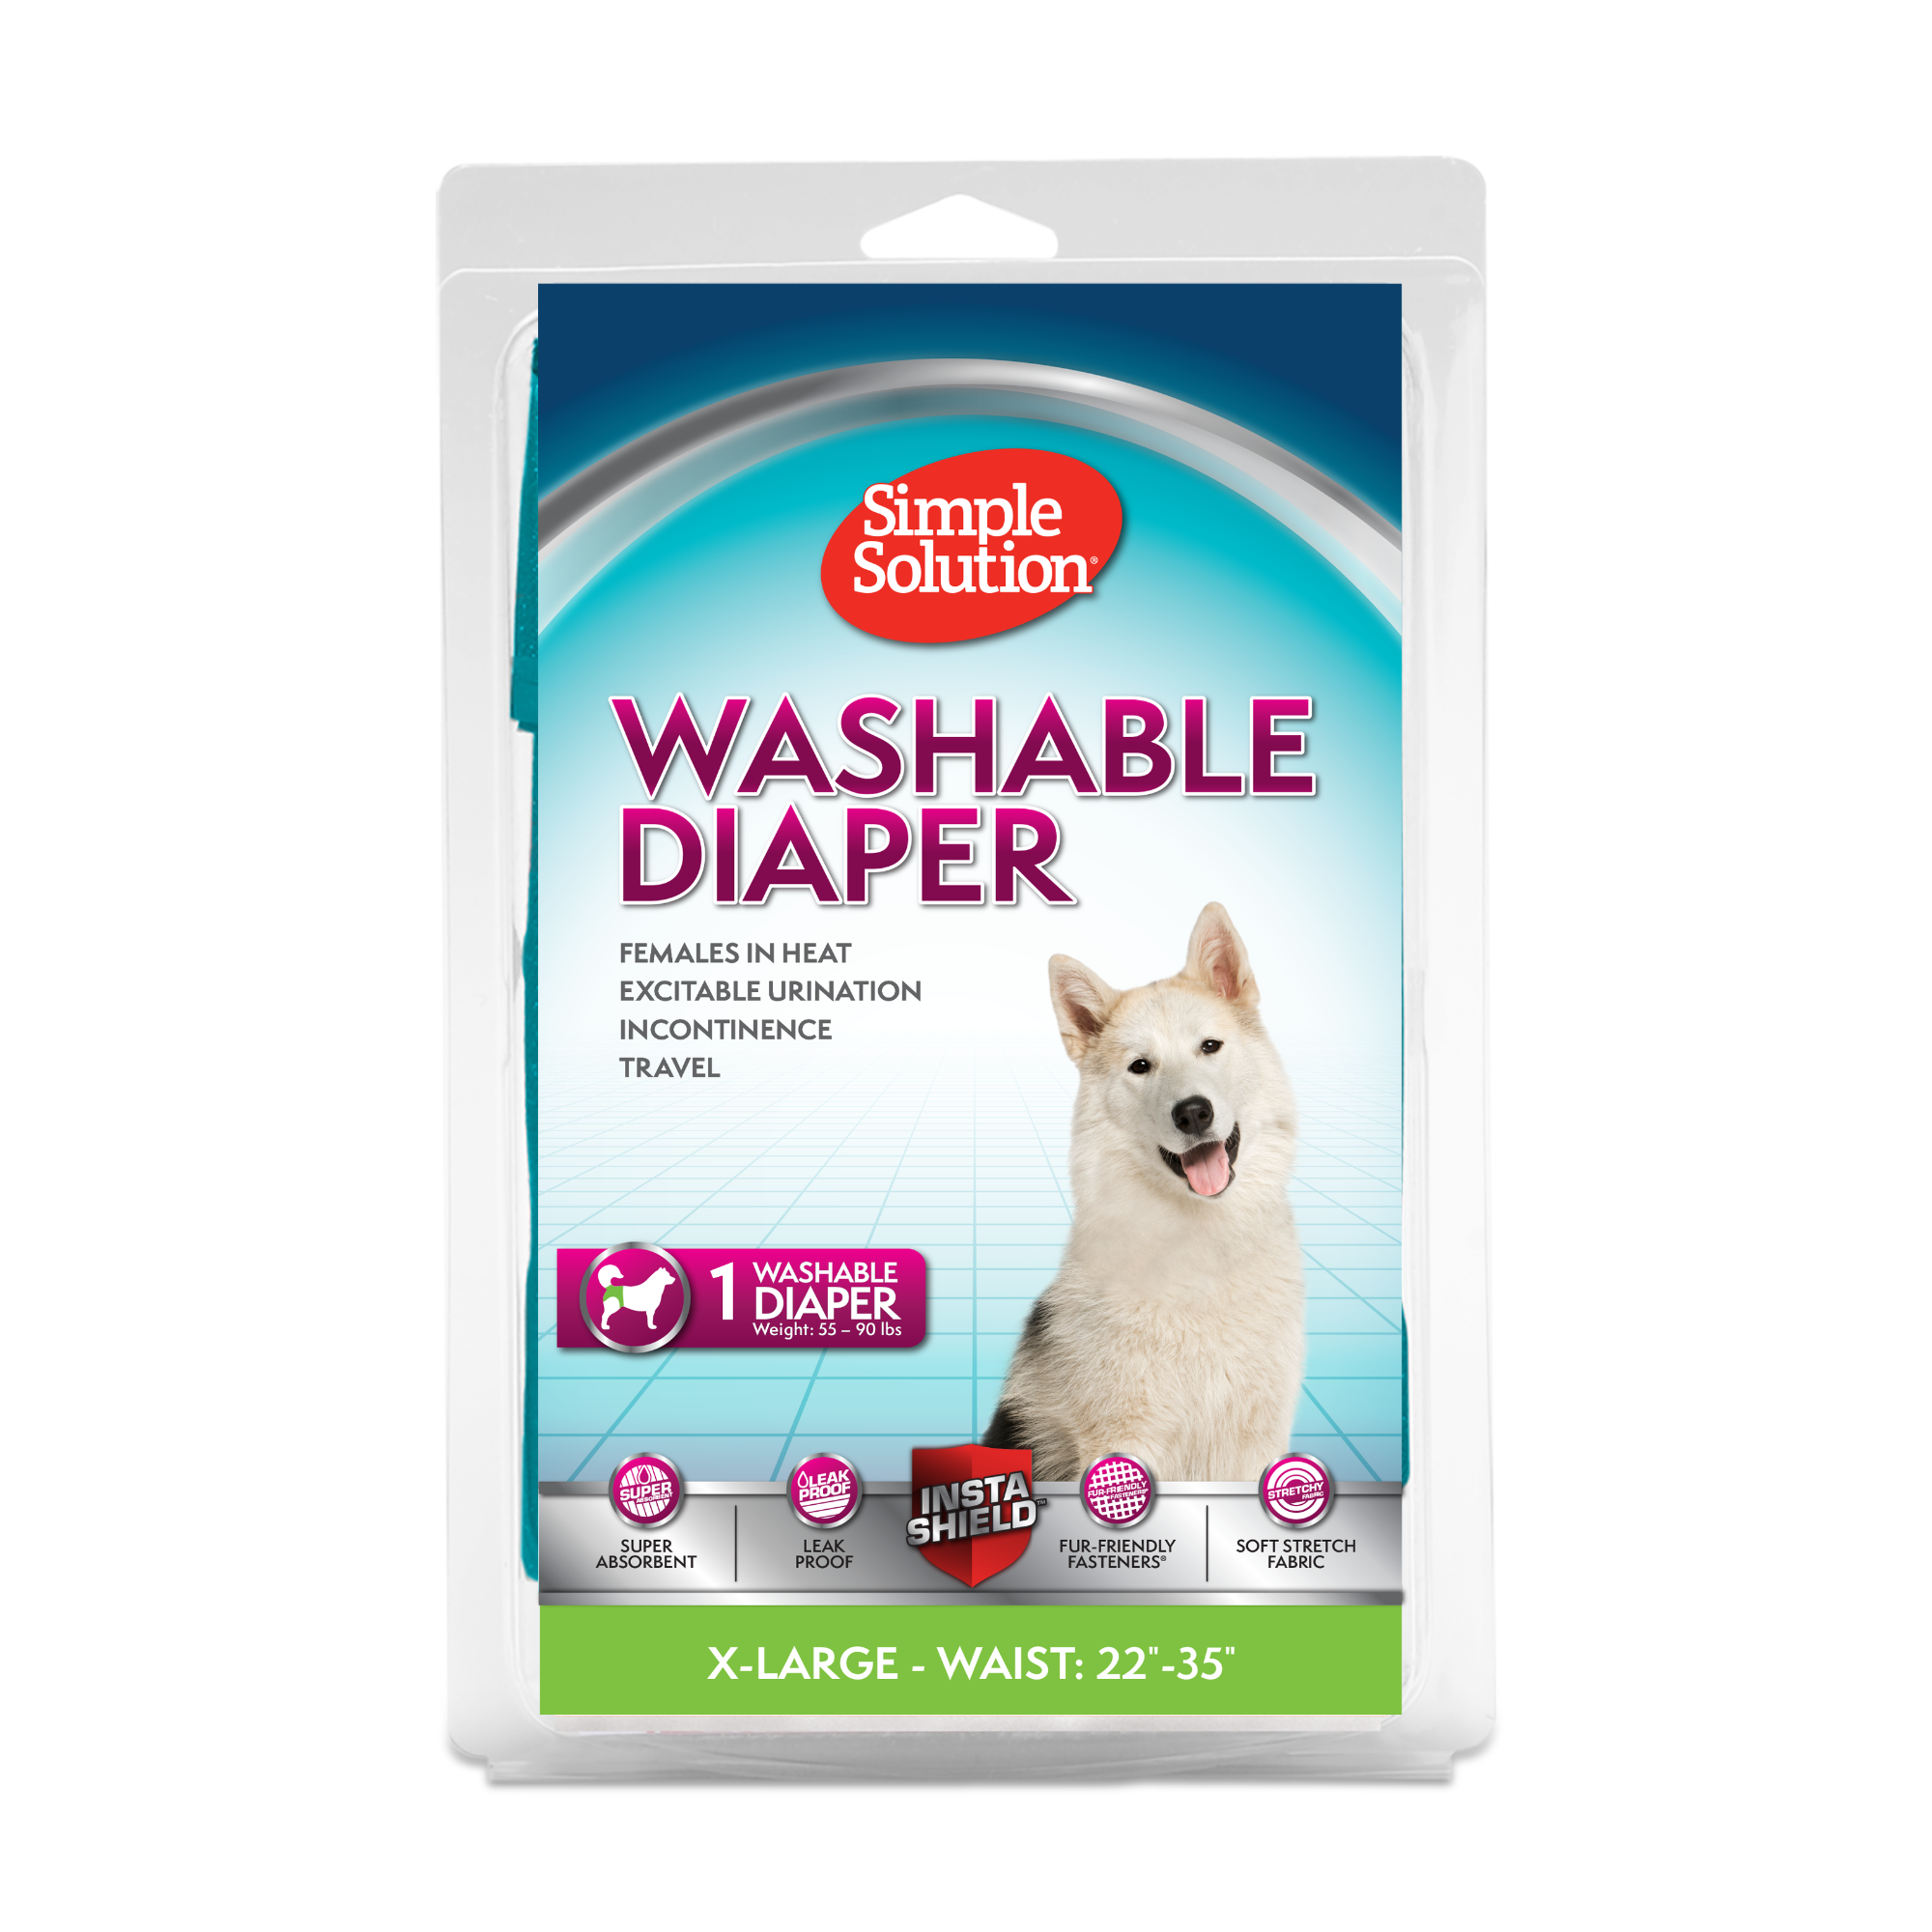 Tineer Washable Female Dog Diapers Reusable Puppy Leakproof Physiological Nappies Pant for Female Dogs 3-Pack Small 